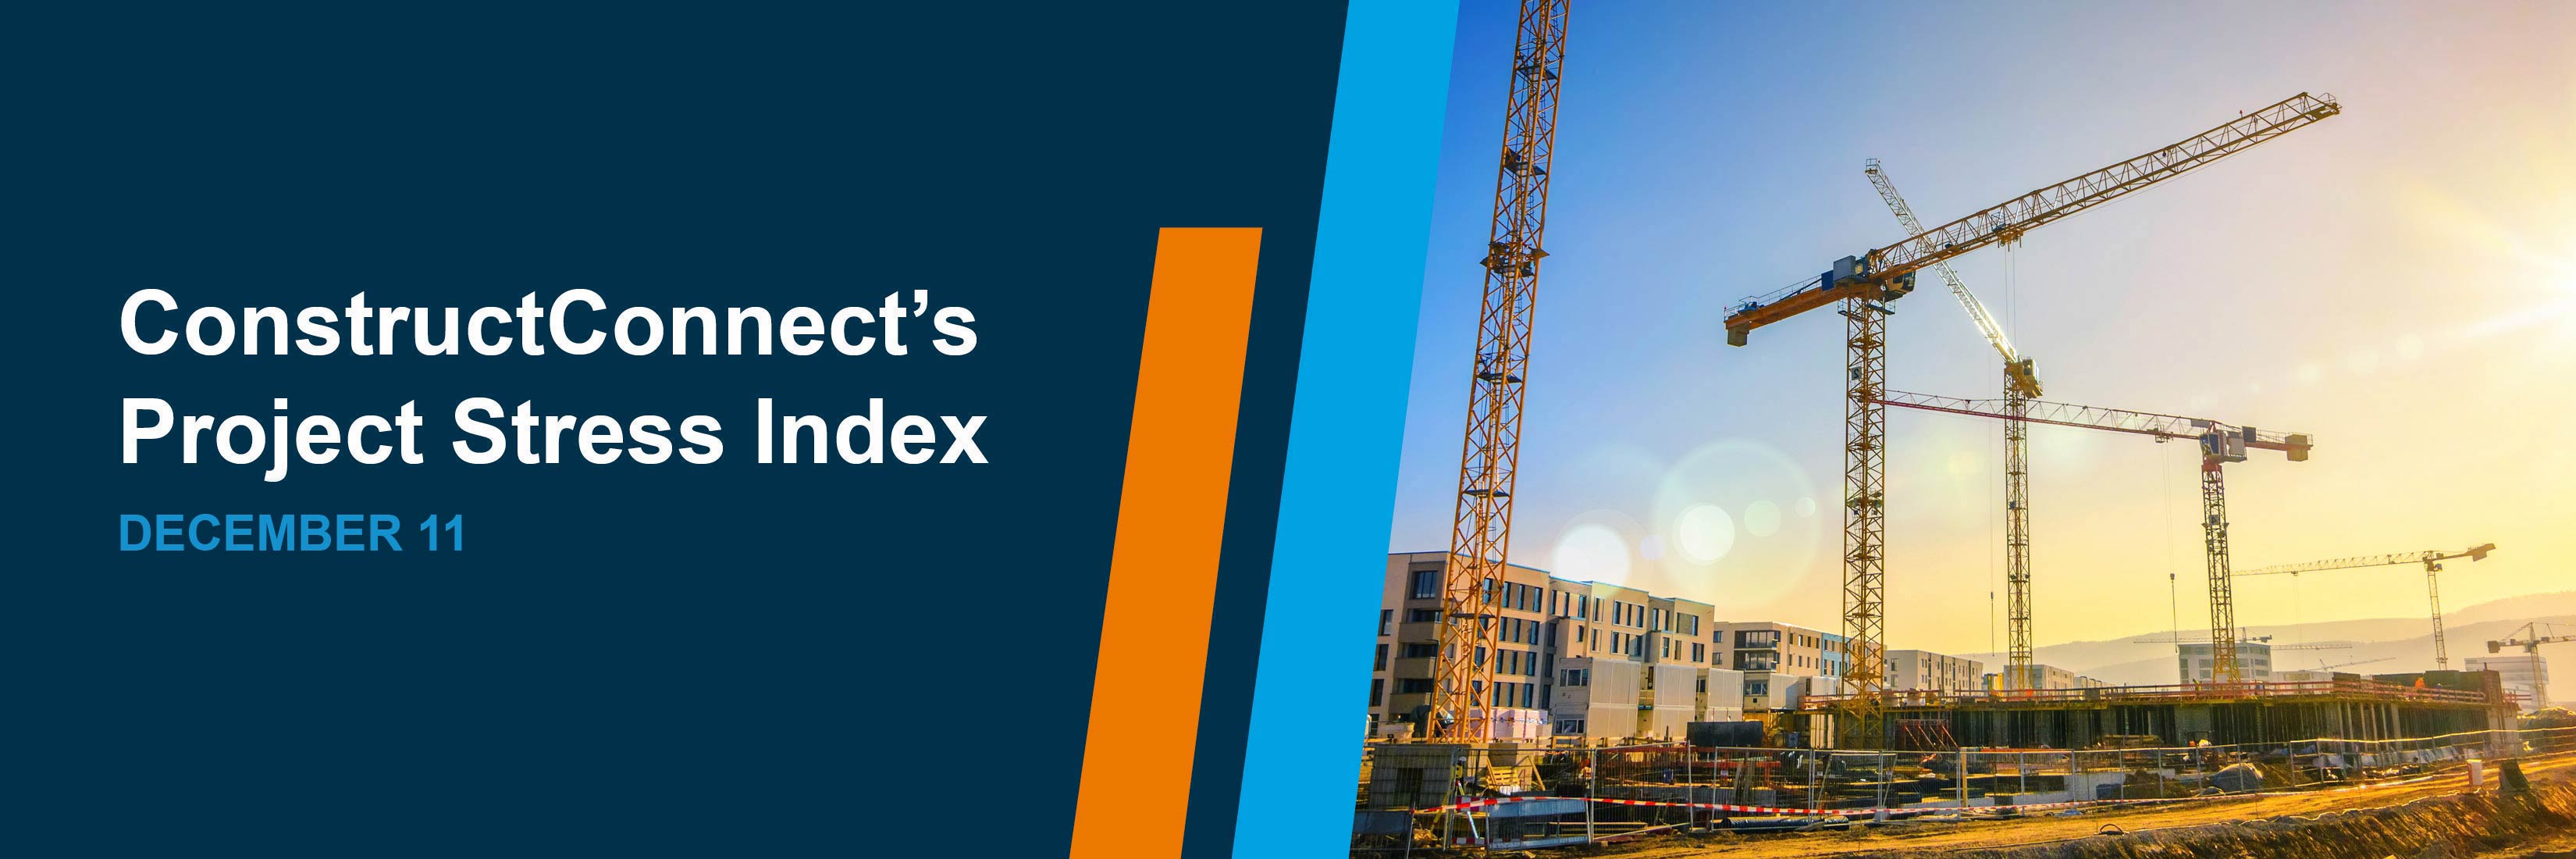 ConstructConnect's Project Stress Index - December 11